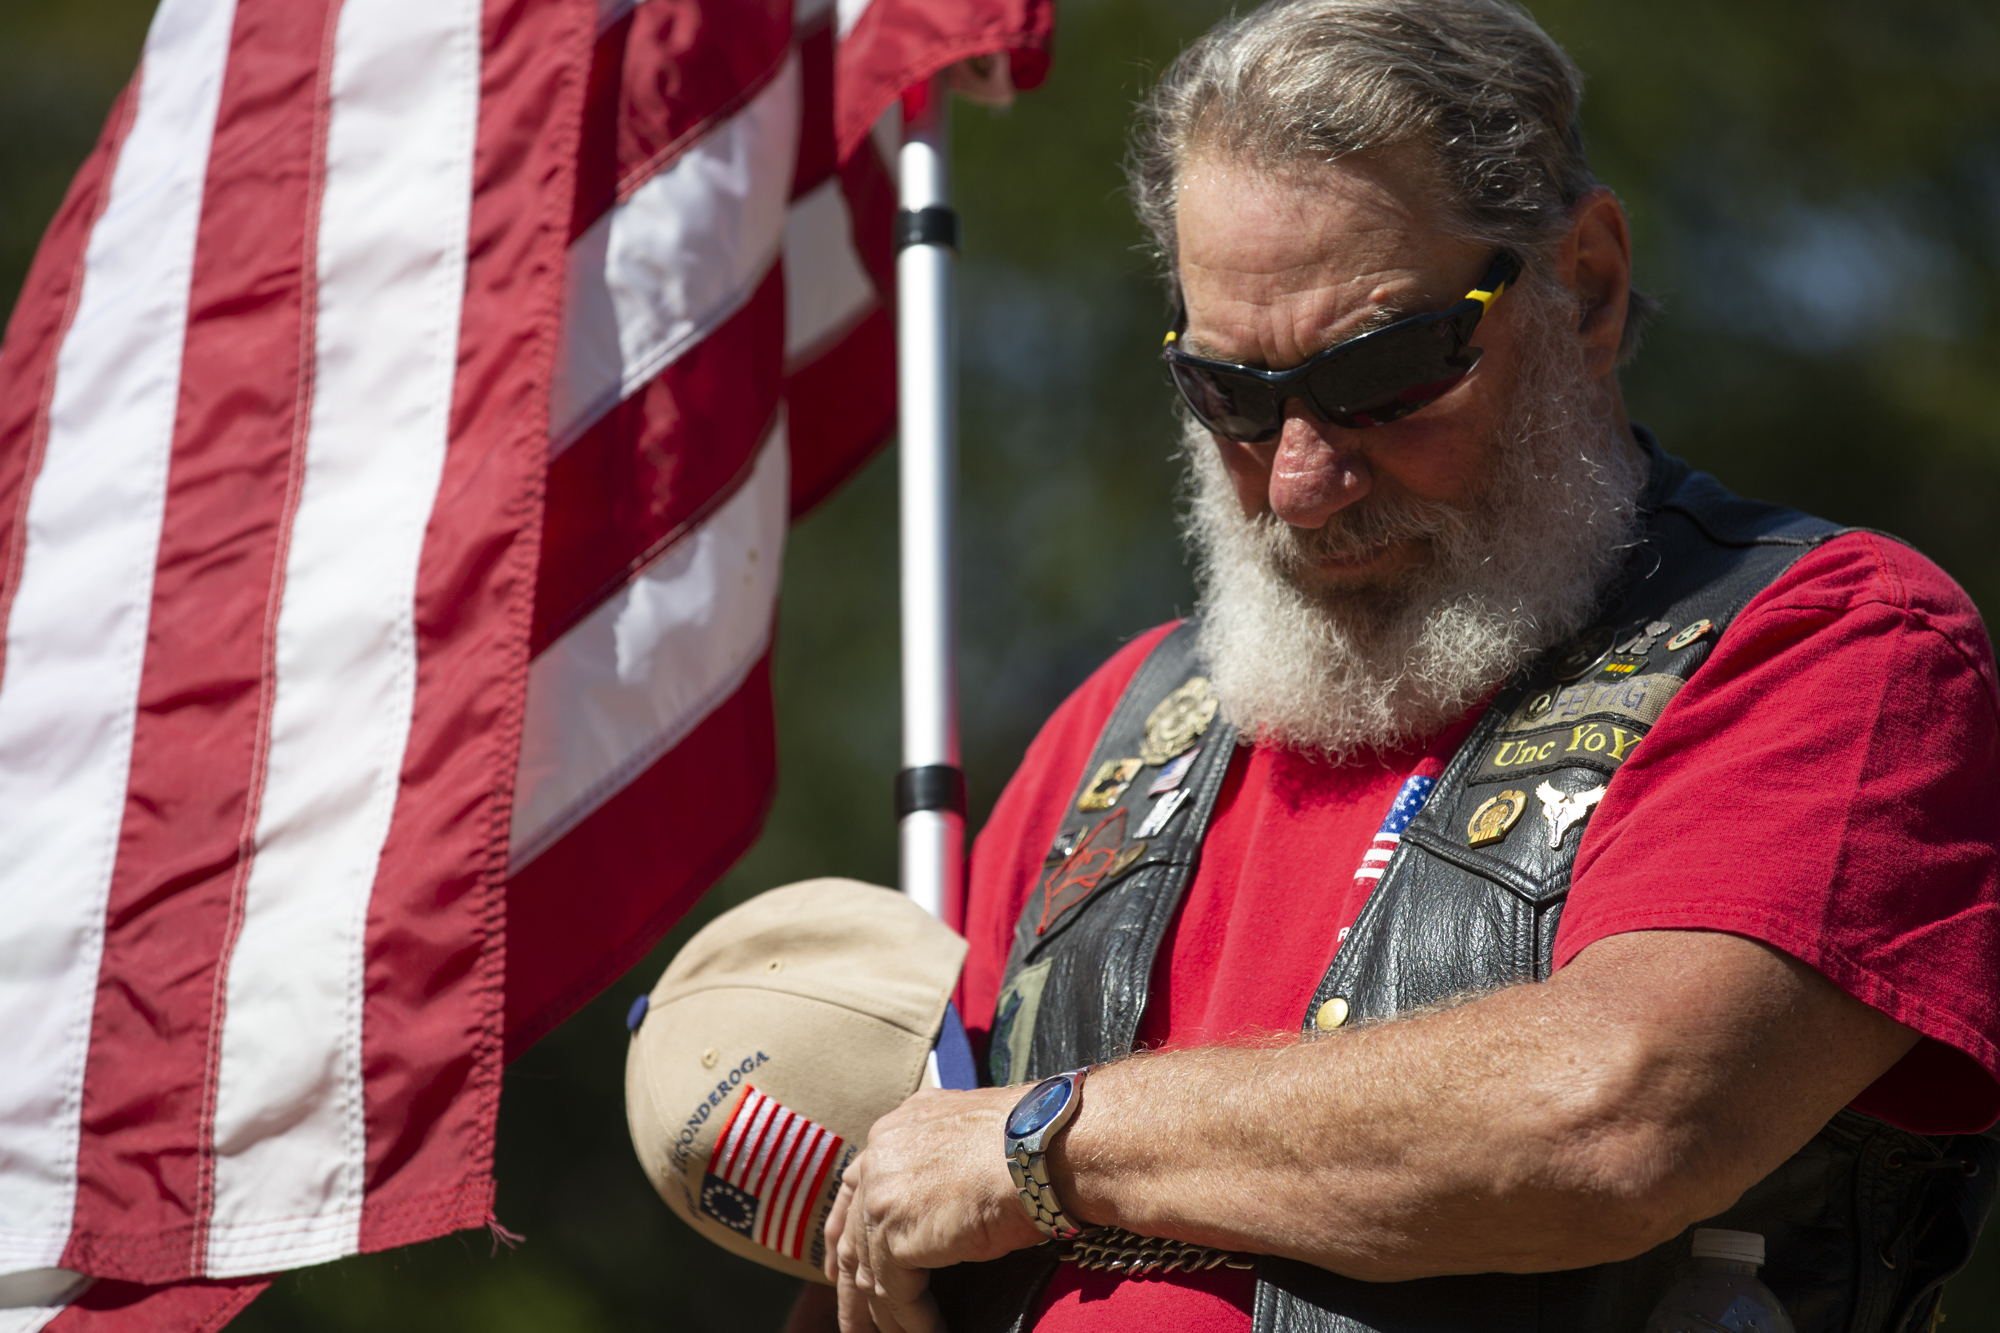 Patriot Guard Rider, Joe Fettig, also known as Unc YoYo, holds an American flag during a ceremony honoring the memory of U.S. Army Sgt. Earl D. Warner and U.S. Army Sgt. Bryce D. Howard at Fort Vancouver Barracks War Memorial in Vancouver on Saturday, August 28, 2021.